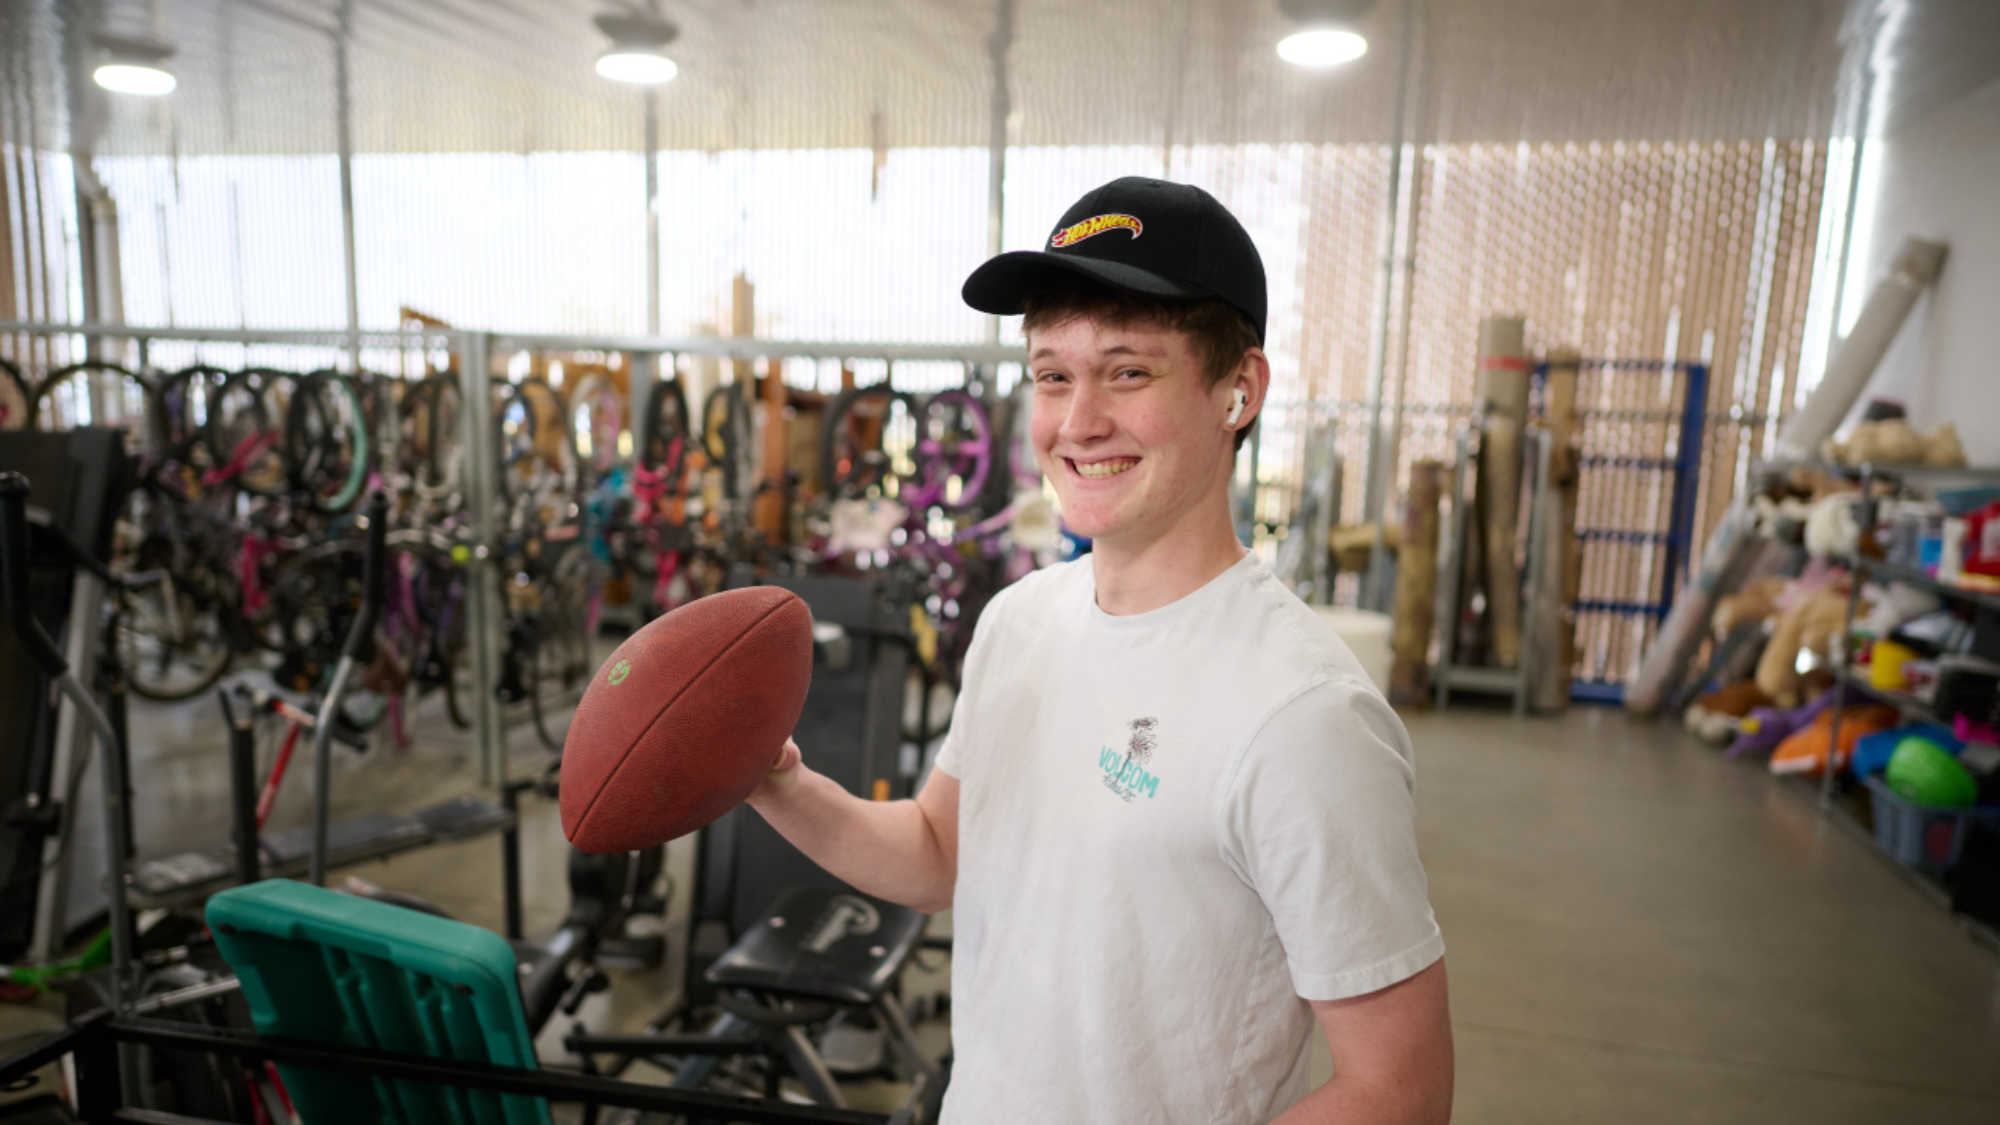 A DI shopper smiles as he finds a football in the store's yard area